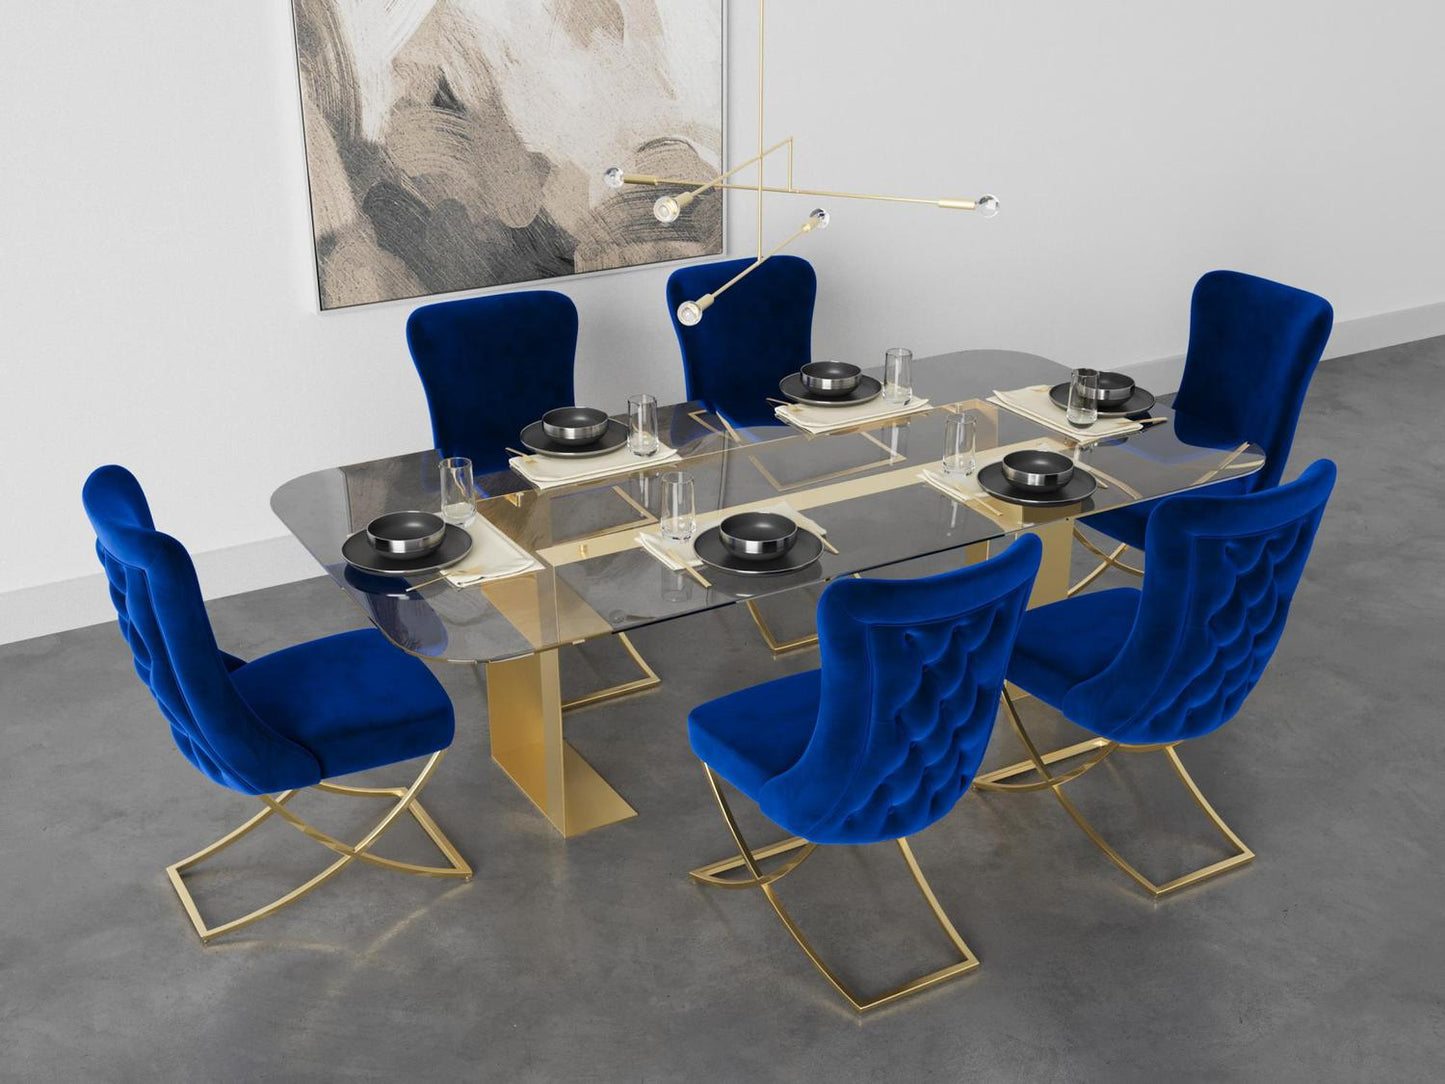 Sultan Collection Wing Back, Modern design, upholstered dining chair in Imperial Blue with Gold Metal legs in a dining room for a large gathering setup.